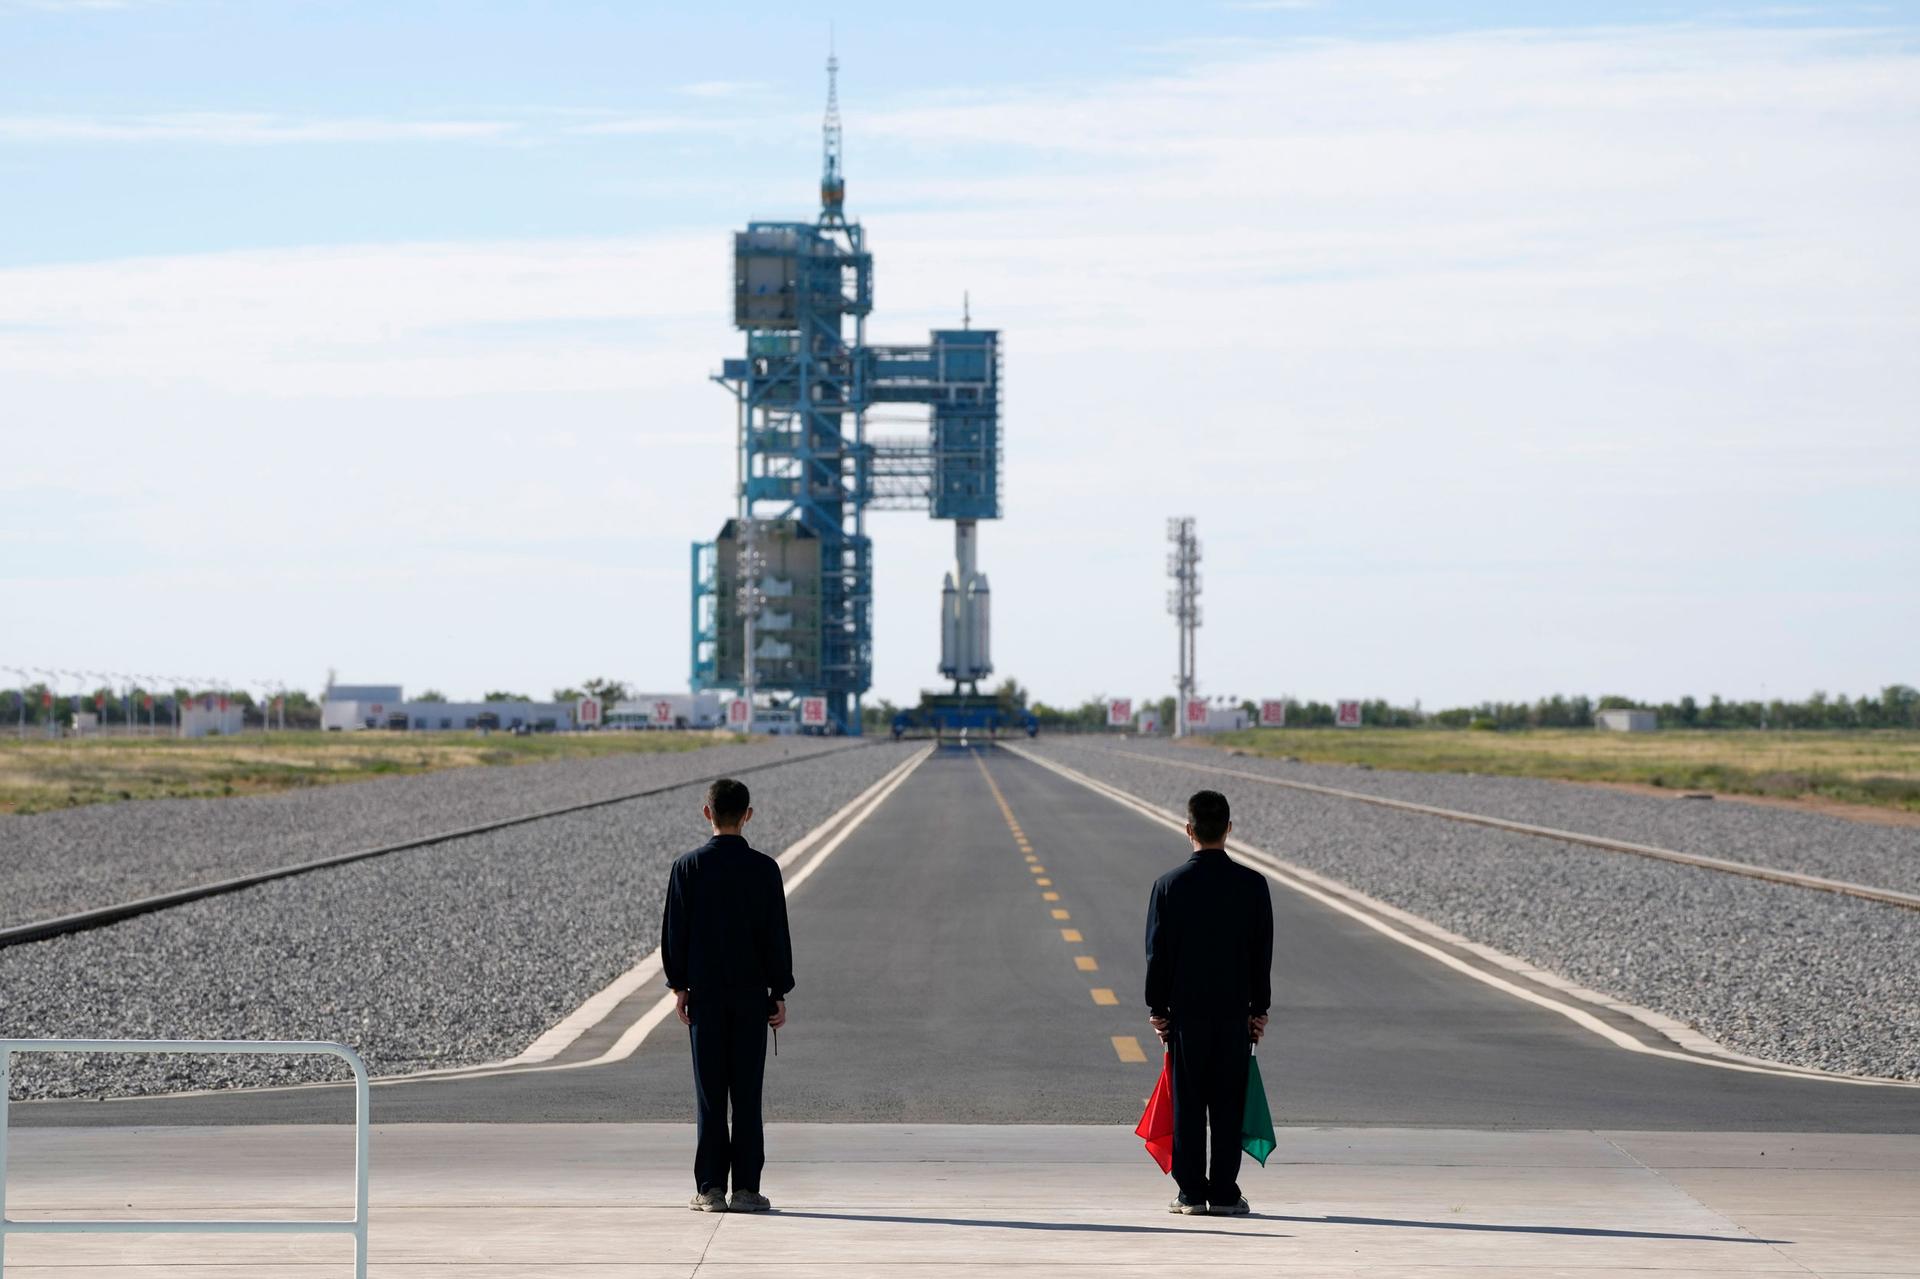 Two people are shown at the end of a long tarmac with the Chinese spaceship set for launch in the distance.